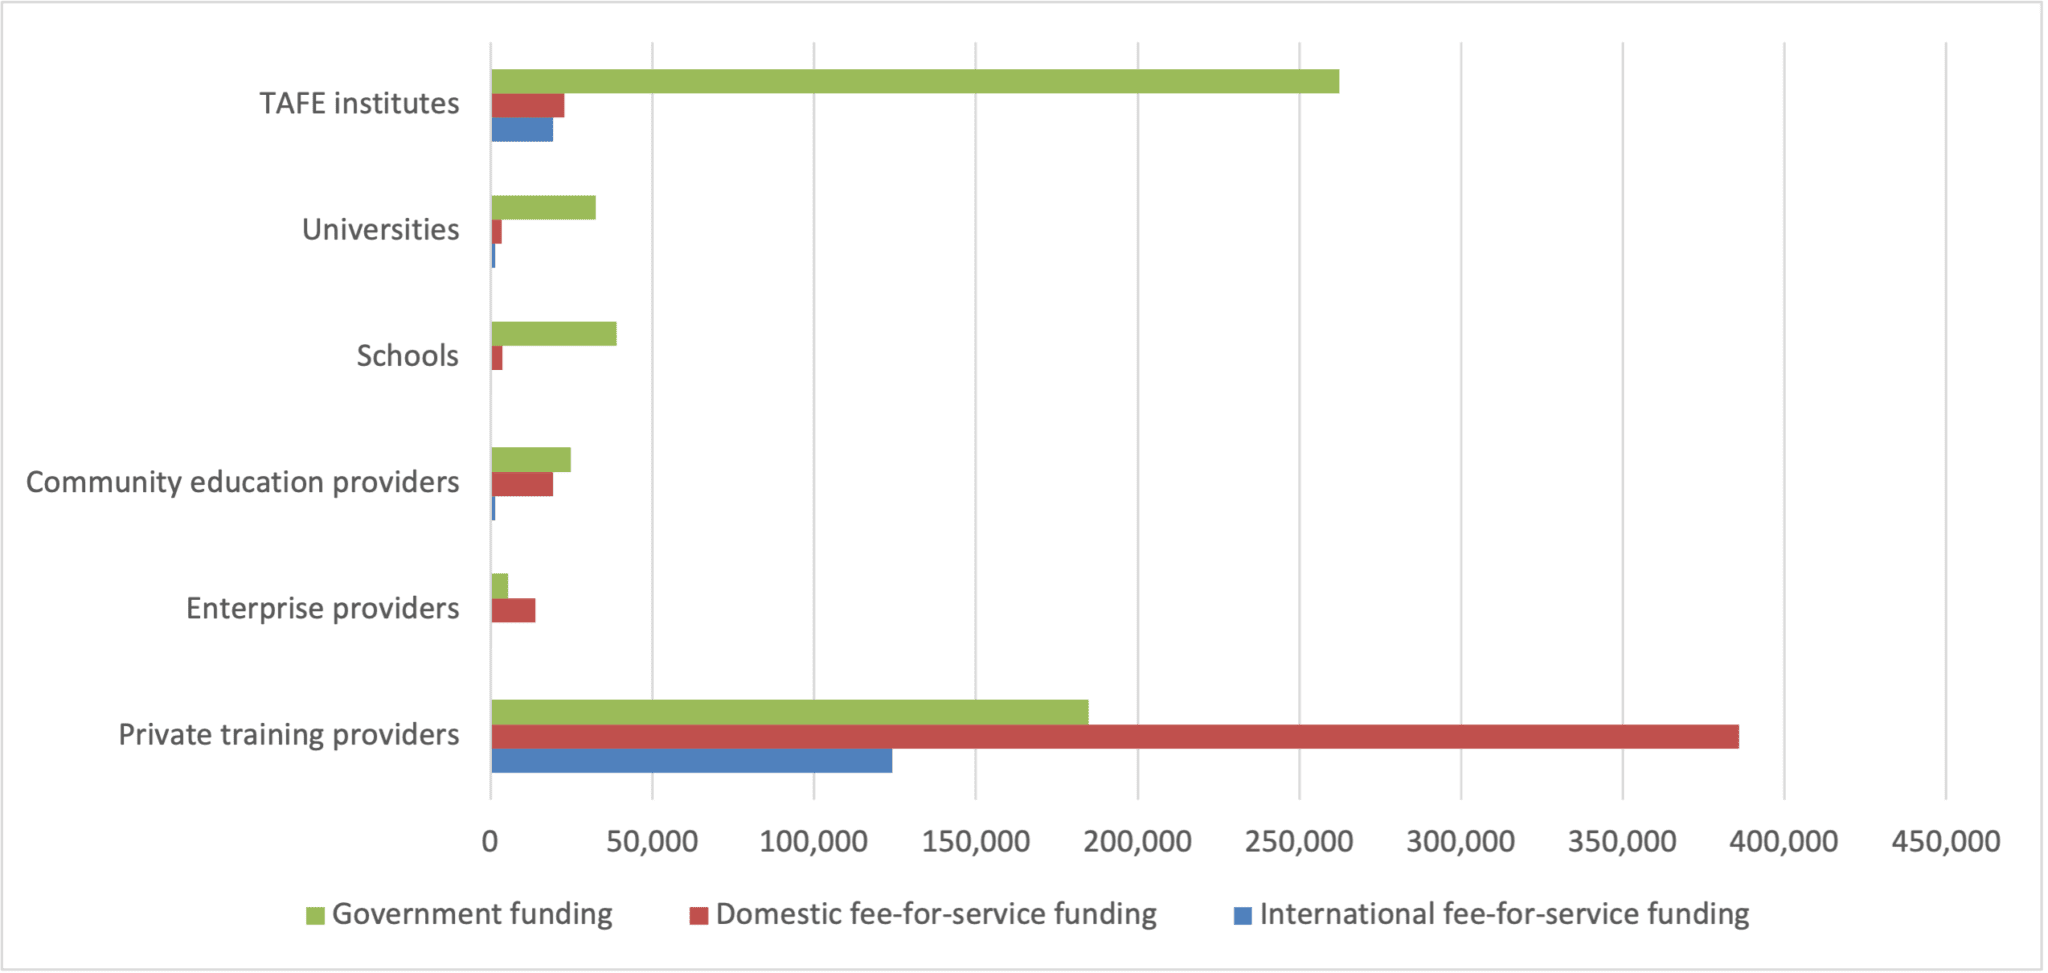 Full-time equivalent students by provider and funding source